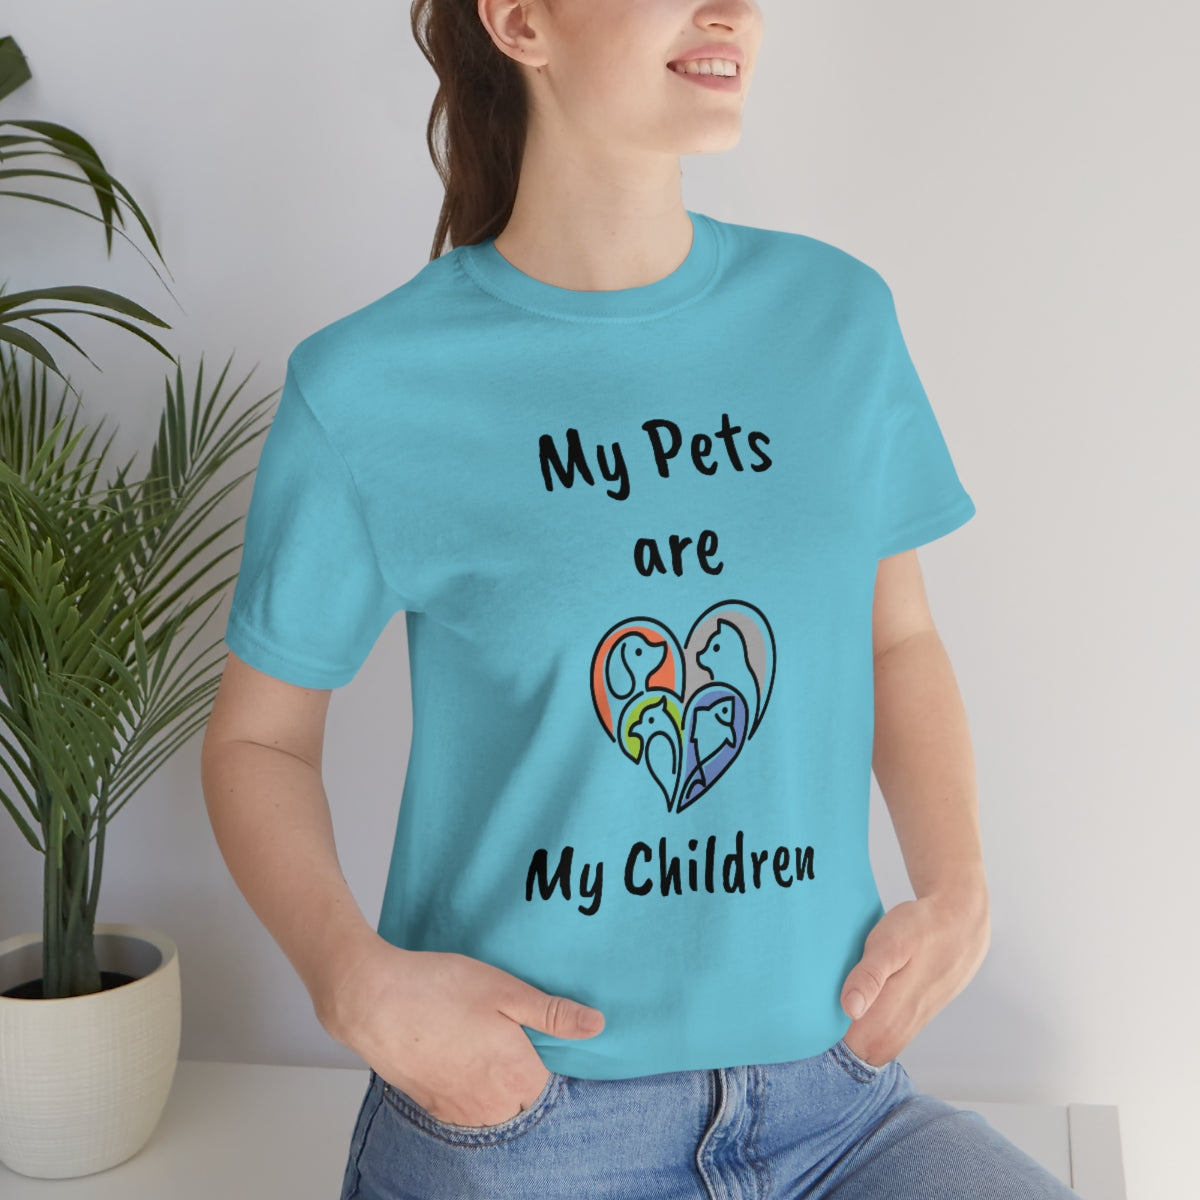 My pets are my children - Funny - Unisex Short Sleeve Tee